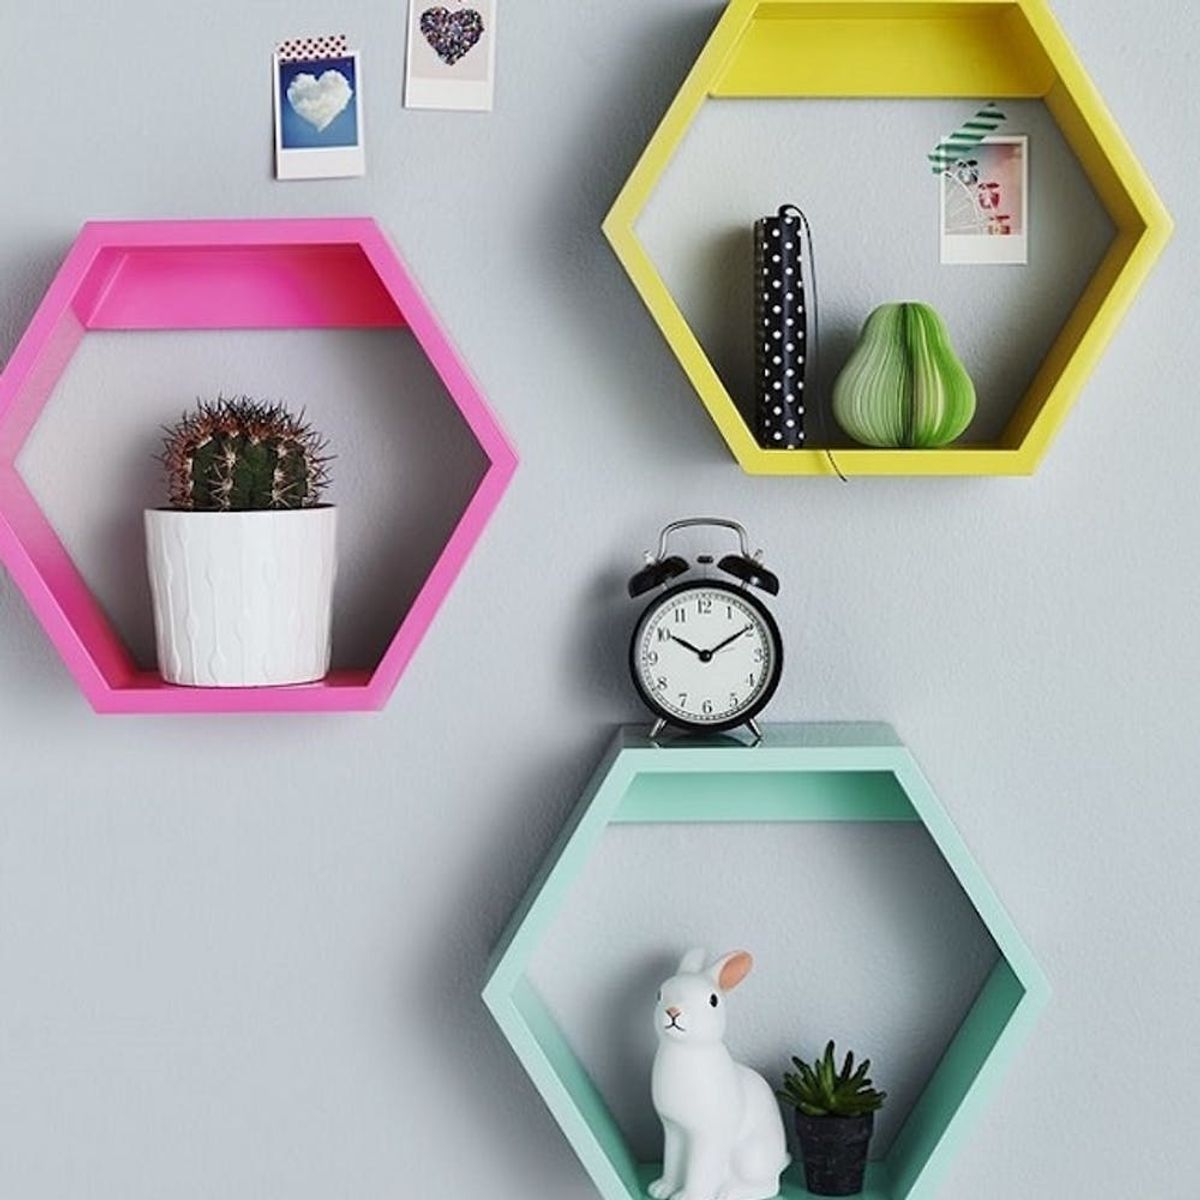 14 Ways to Nail the Perfect #Shelfie